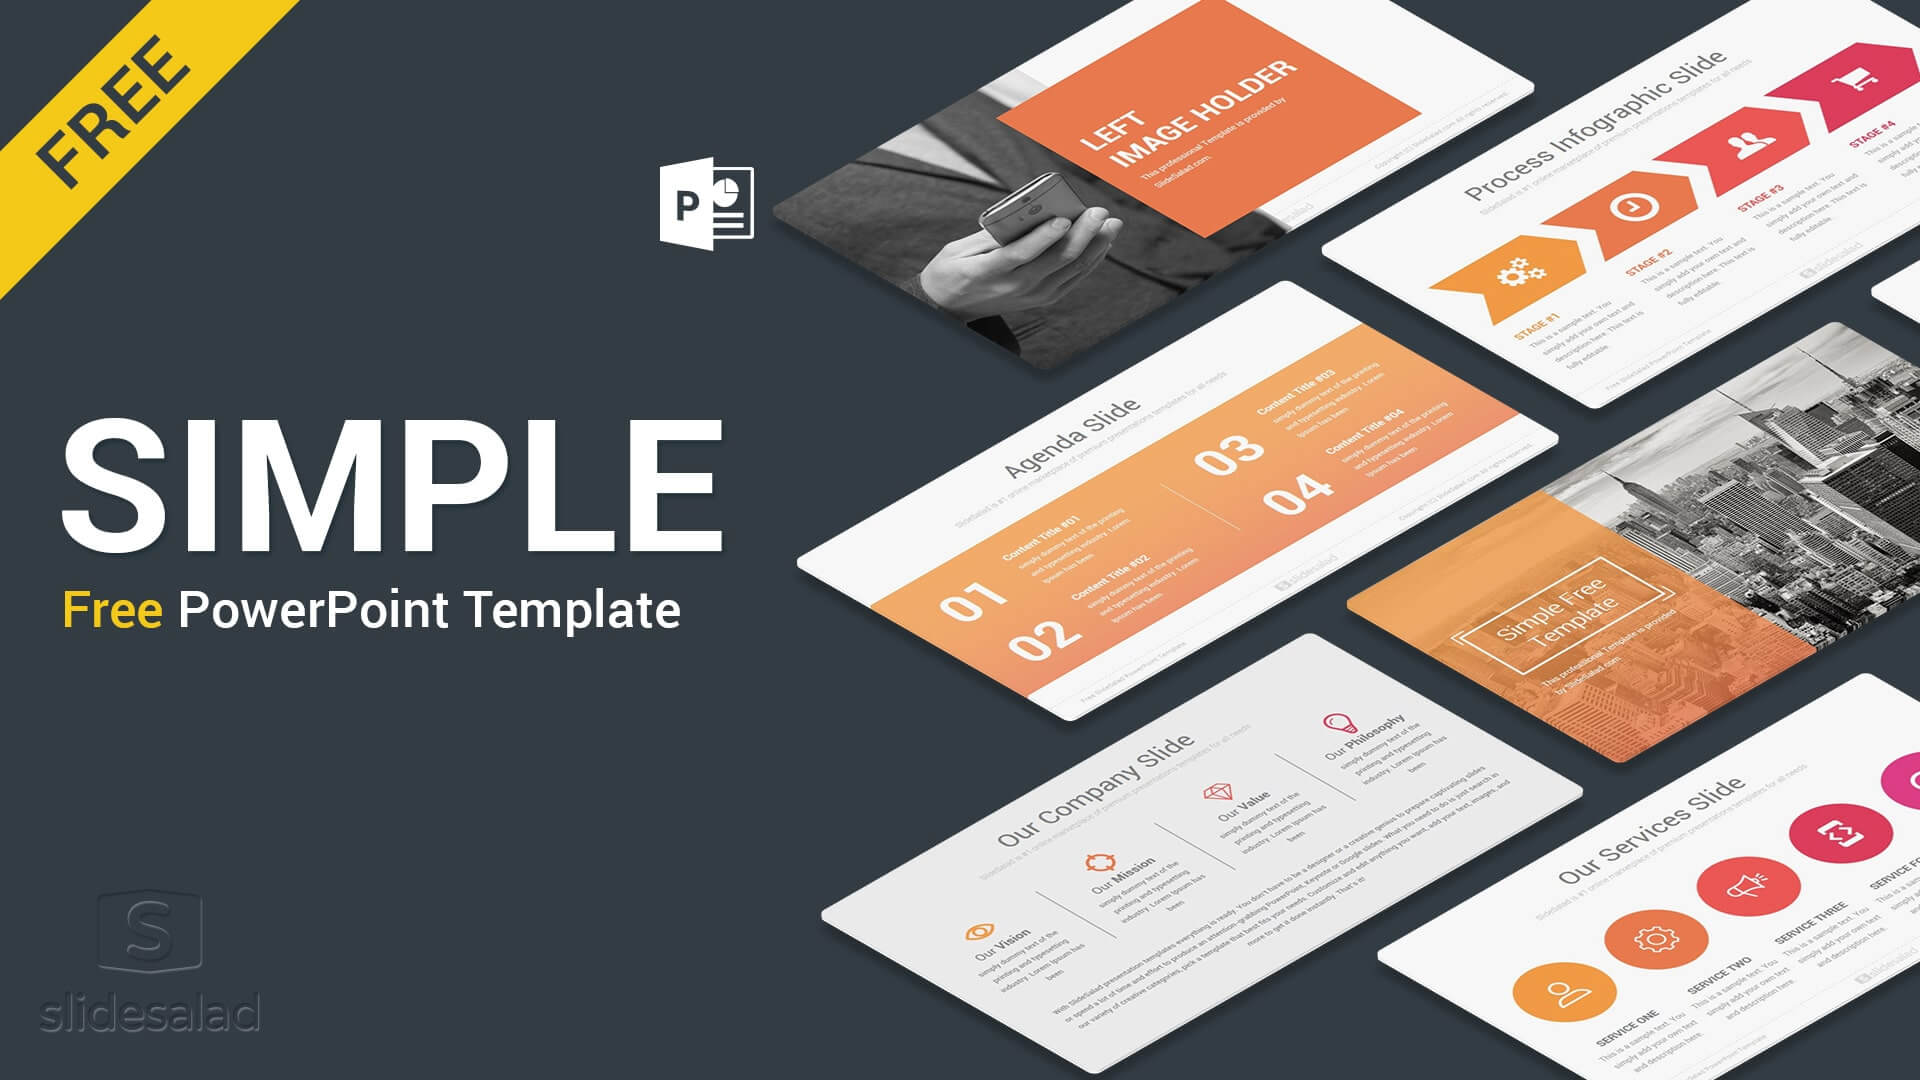 Best Free Presentation Templates Professional Designs 2019 Within Business Card Template Powerpoint Free